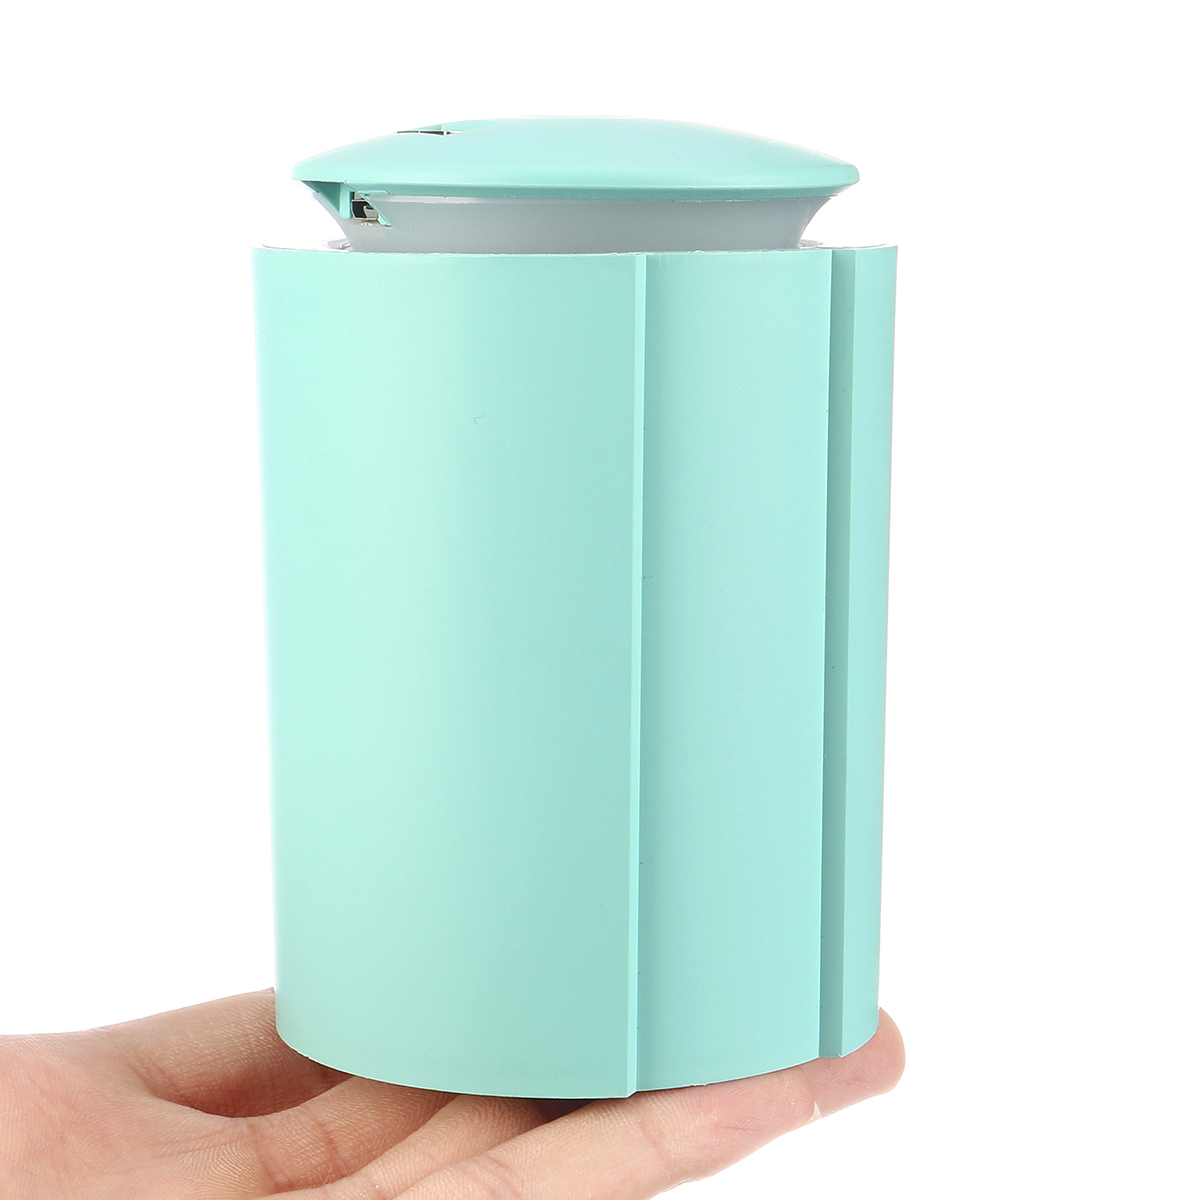 260ml-5V-Mini-Air-Humidifier-Night-Light-Portable-USB-Charging-Mute-Touch-Dustproof-for-Home-Office--1758526-7